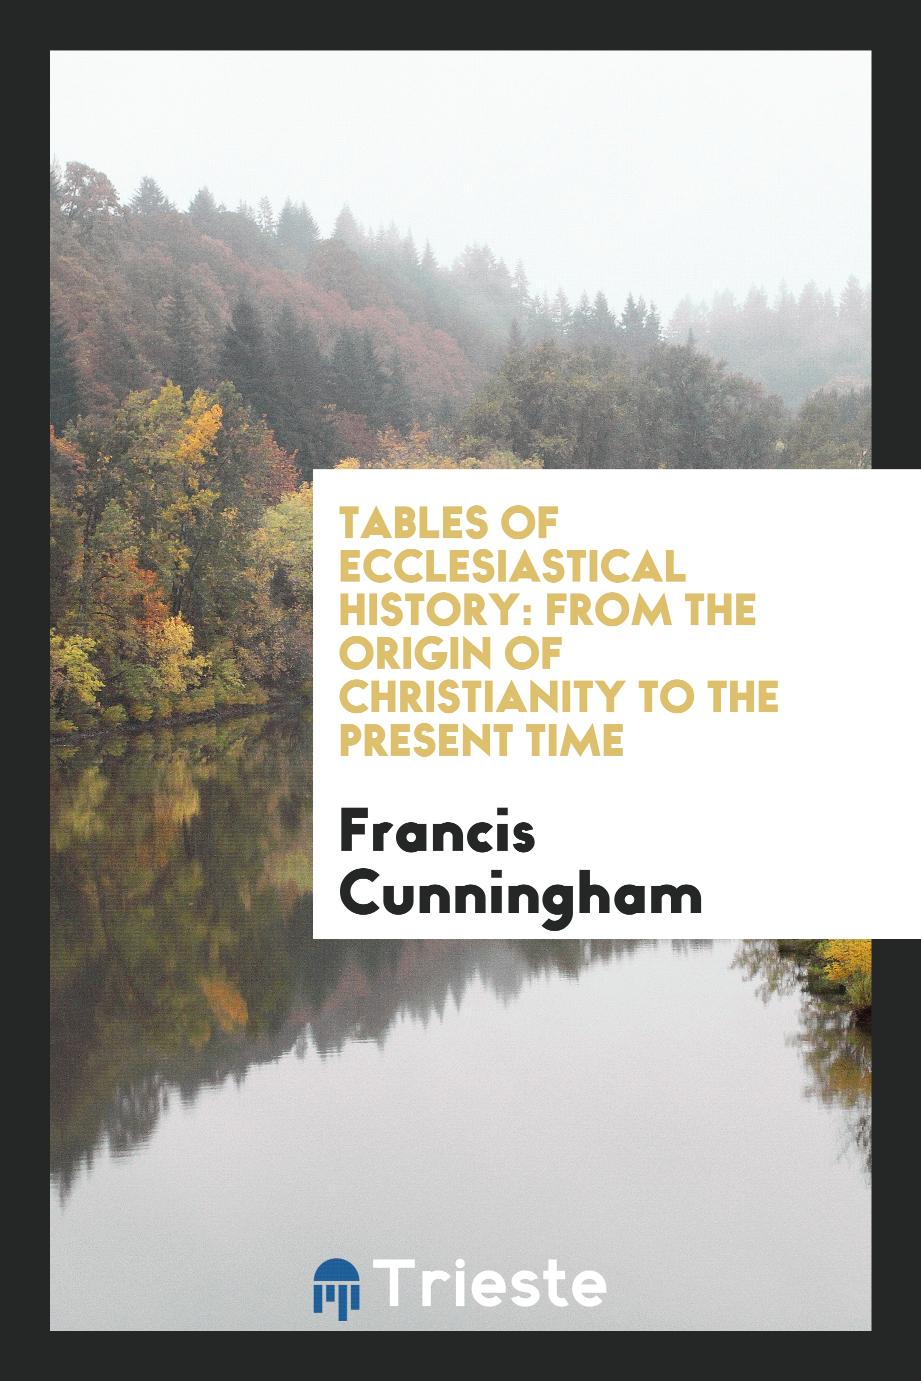 Tables of Ecclesiastical History: From the Origin of Christianity to the present time